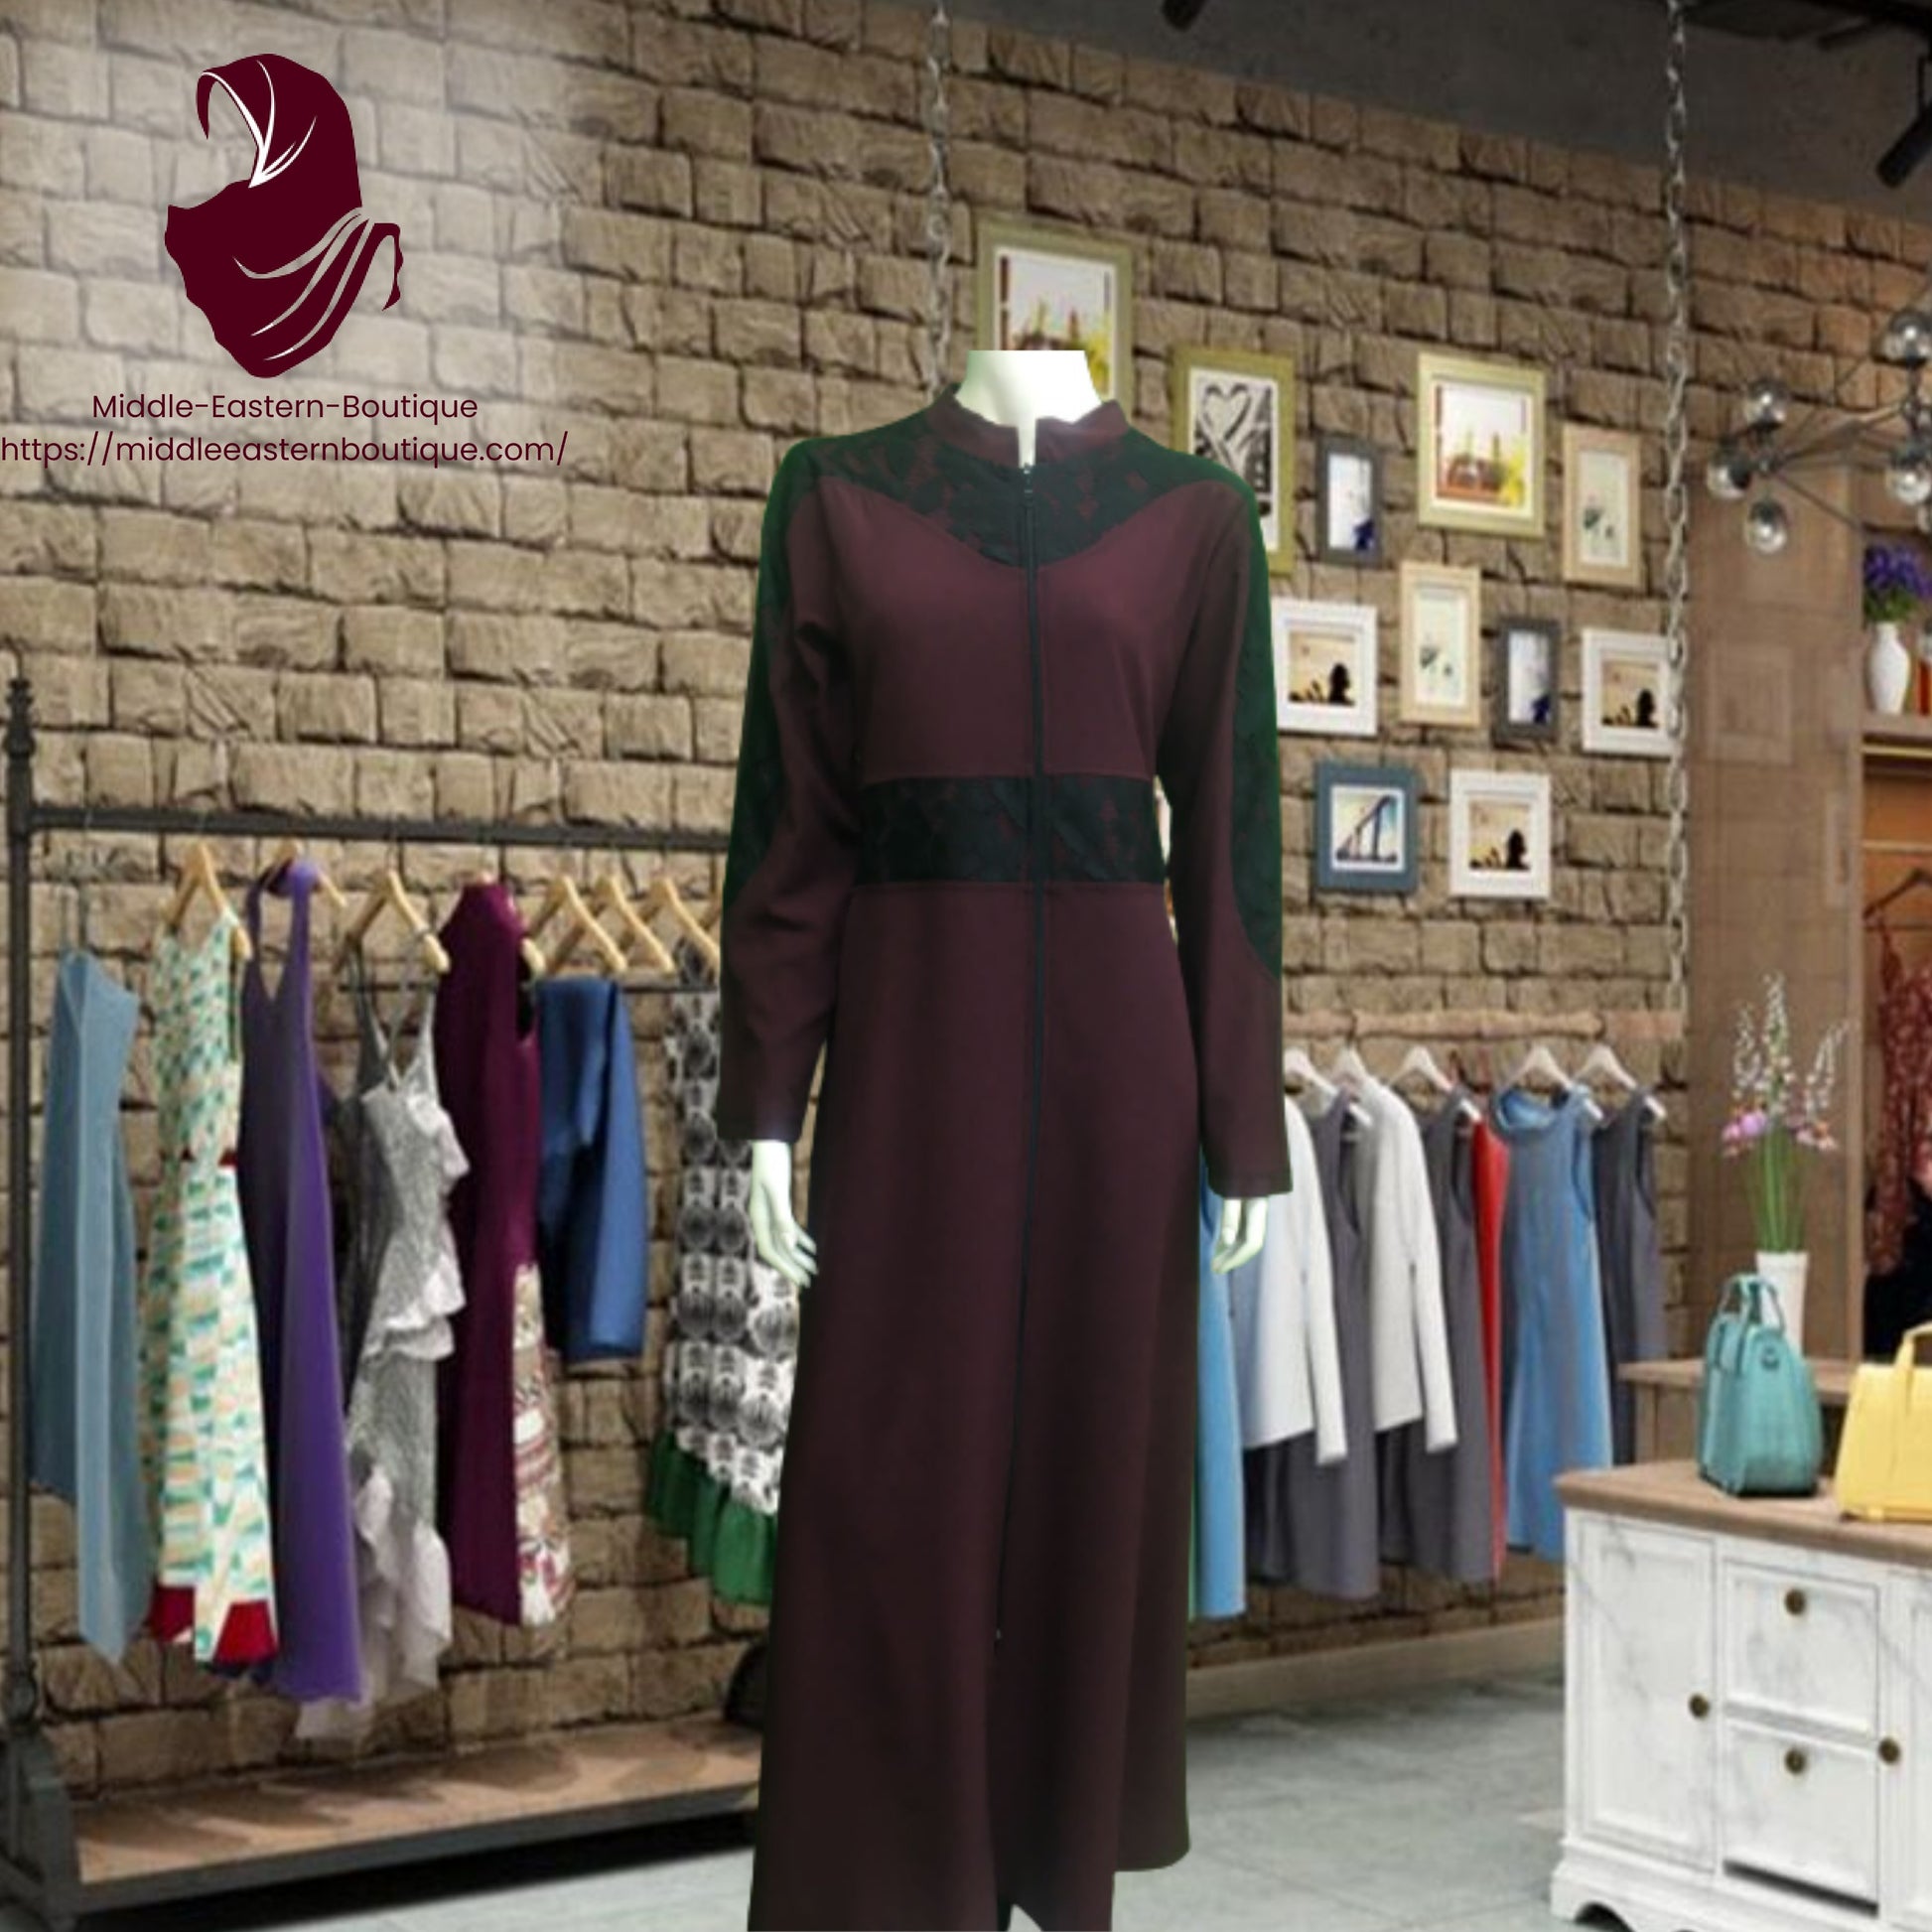 Abaya - Coming Soon  - New Collection of Abaya 2022 Middle Eastern Boutique